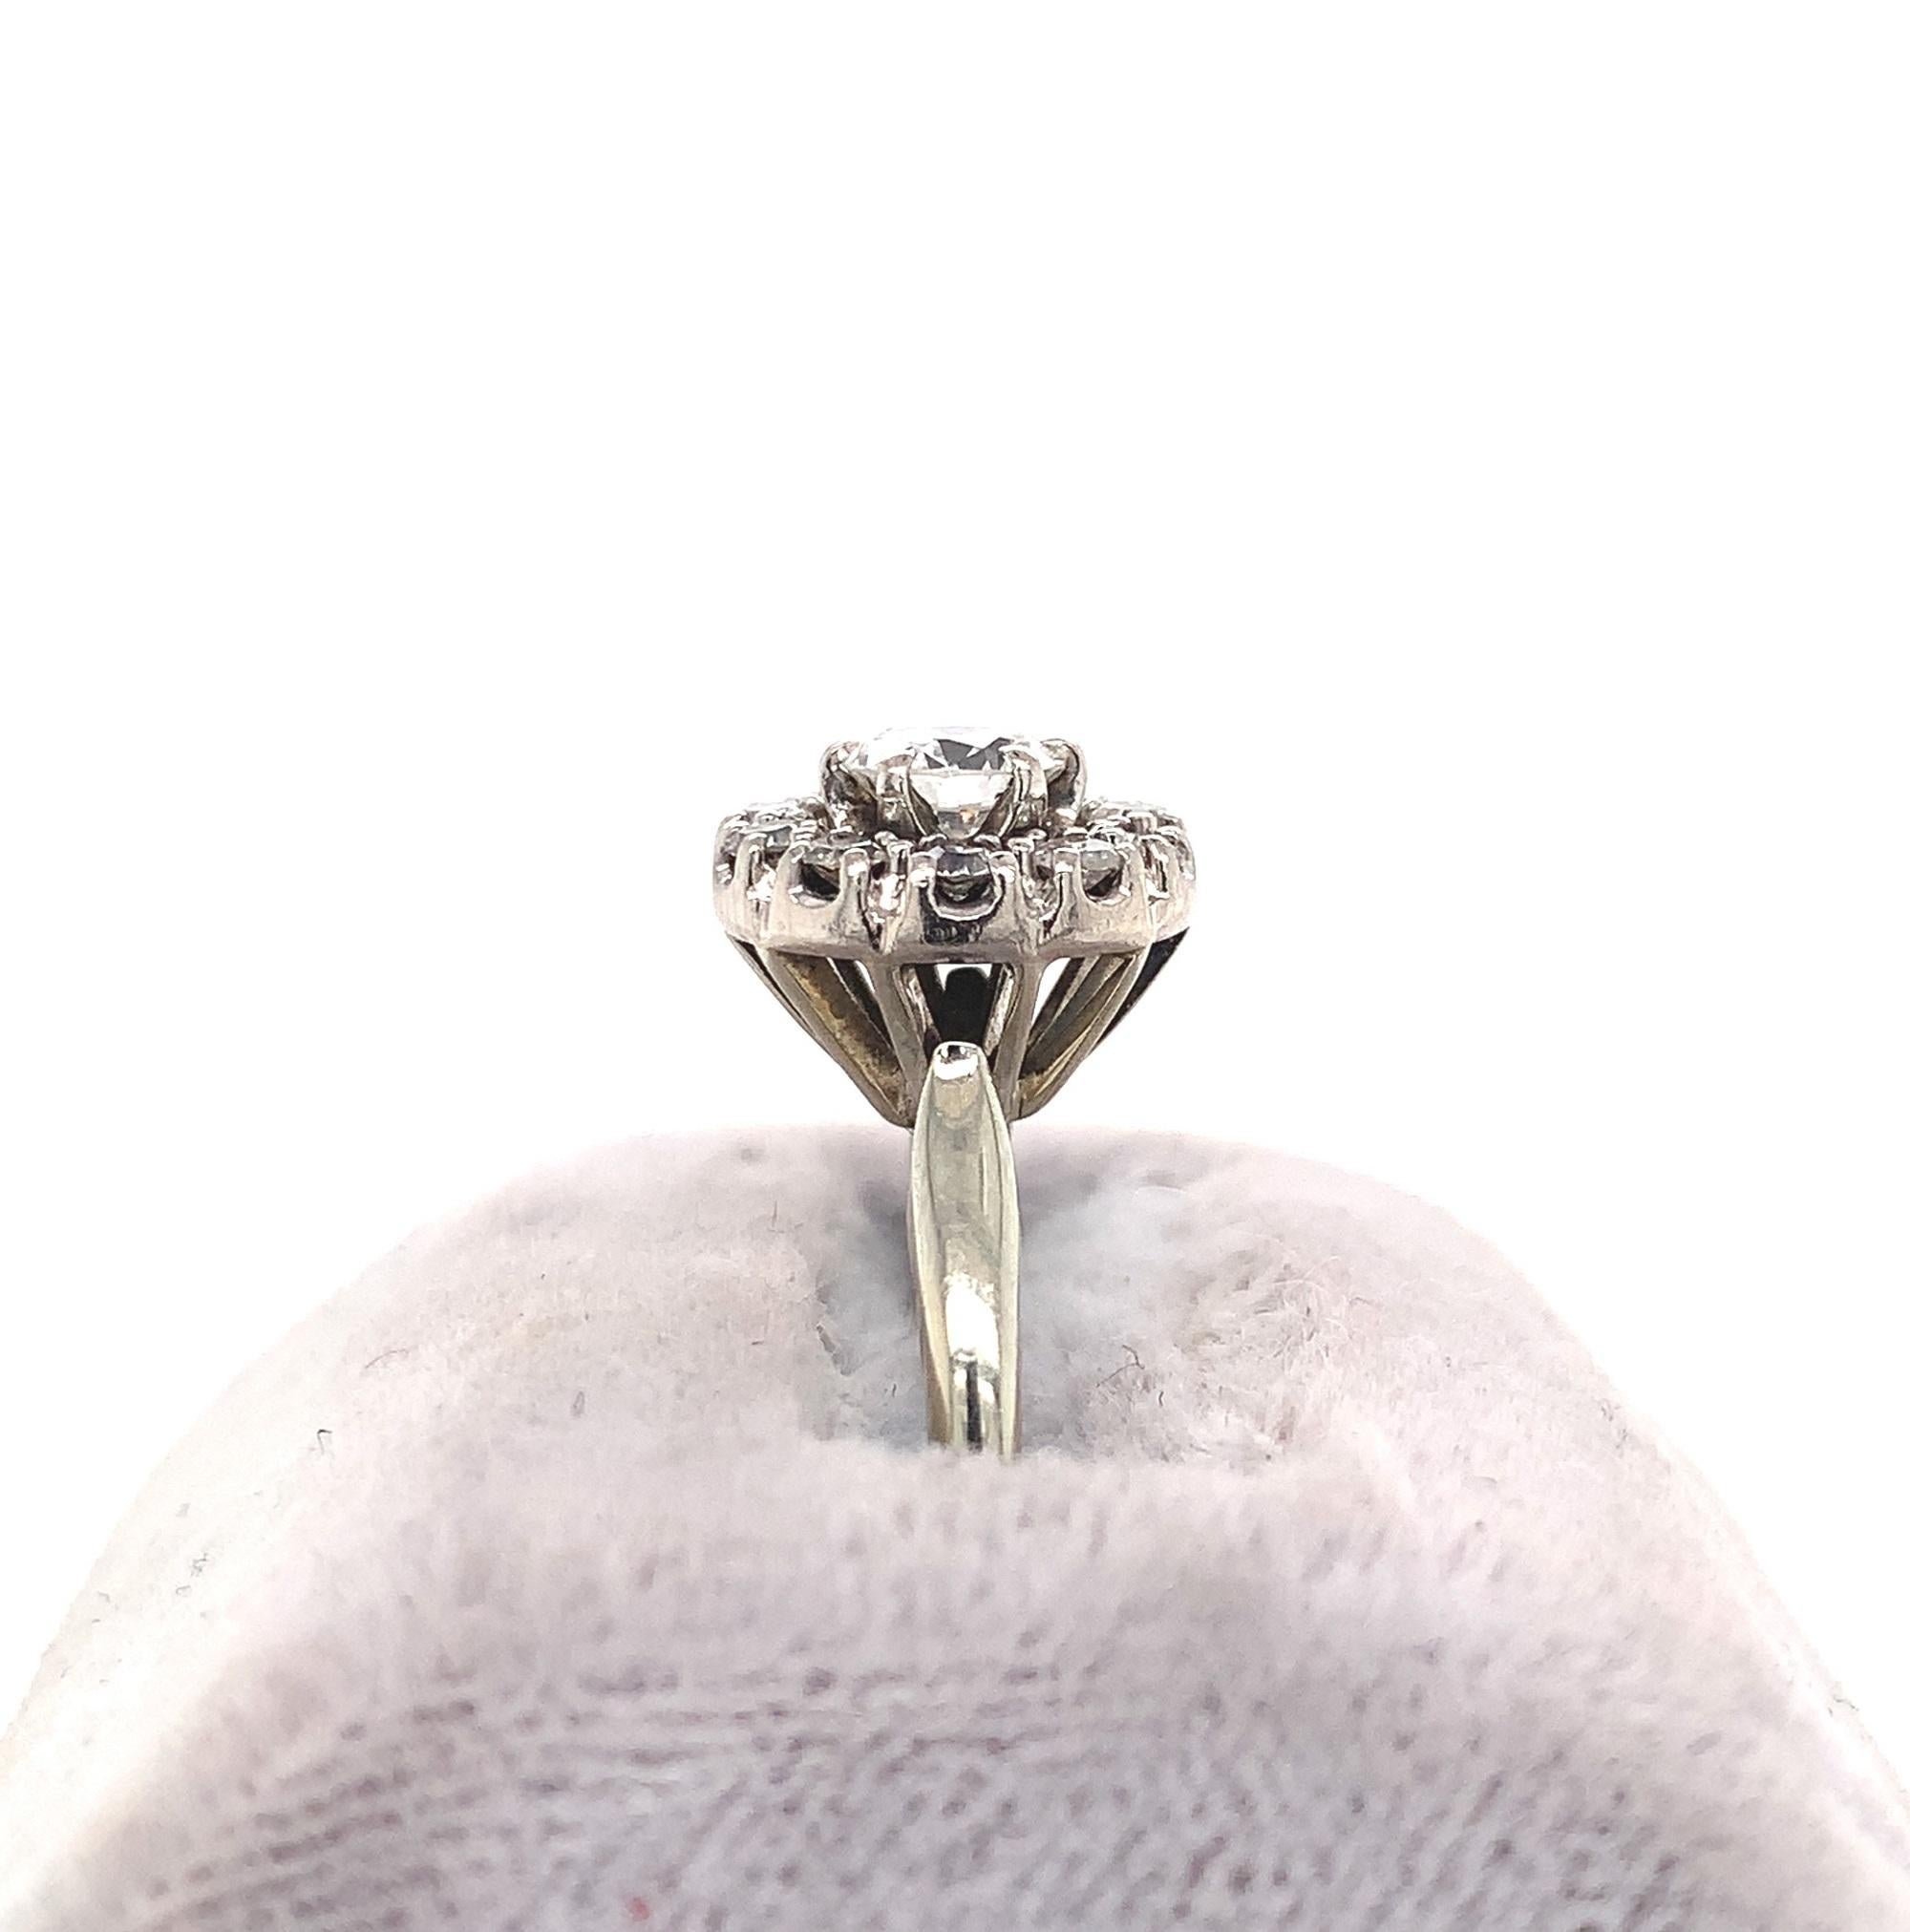  18k white gold antique diamond ring with about .60 carats total weight of vintage round diamonds. The center diamond measures about 4.7mm and weighs about .44cts. The 10 surrounding single cut diamonds measure about 1.7mm each. The diamonds have H